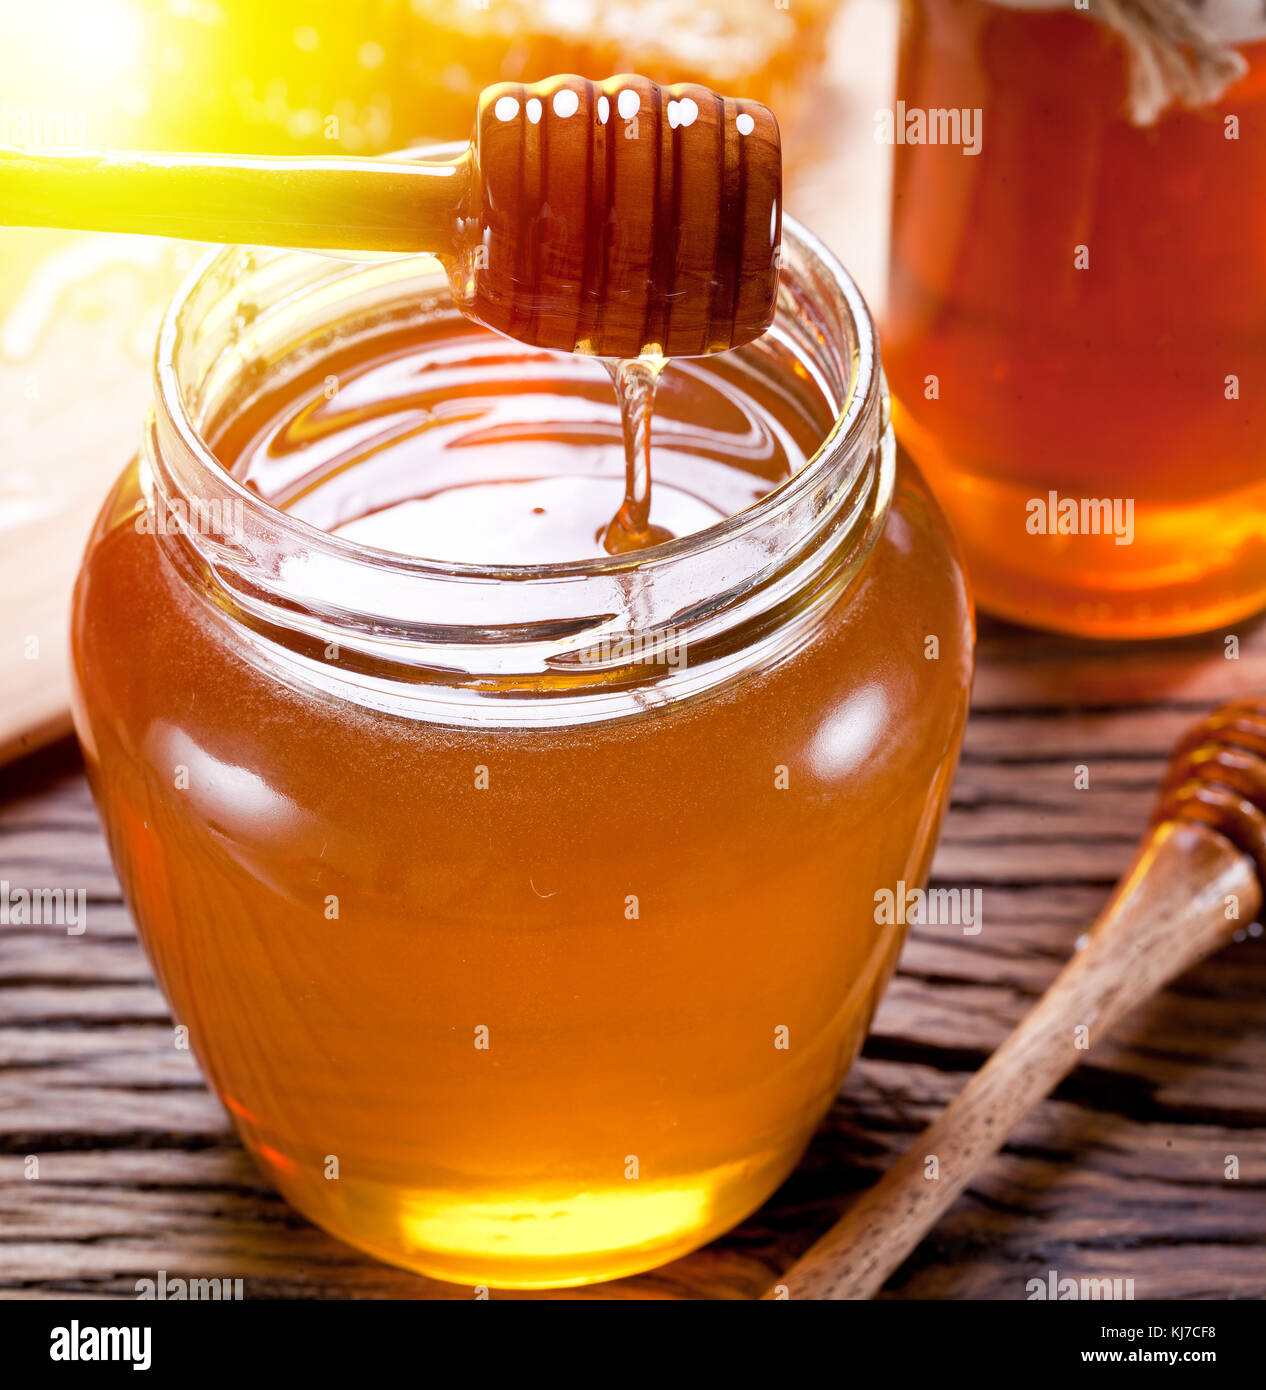 Honey dripping from a dipper into the jar full of fresh honey. Stock Photo